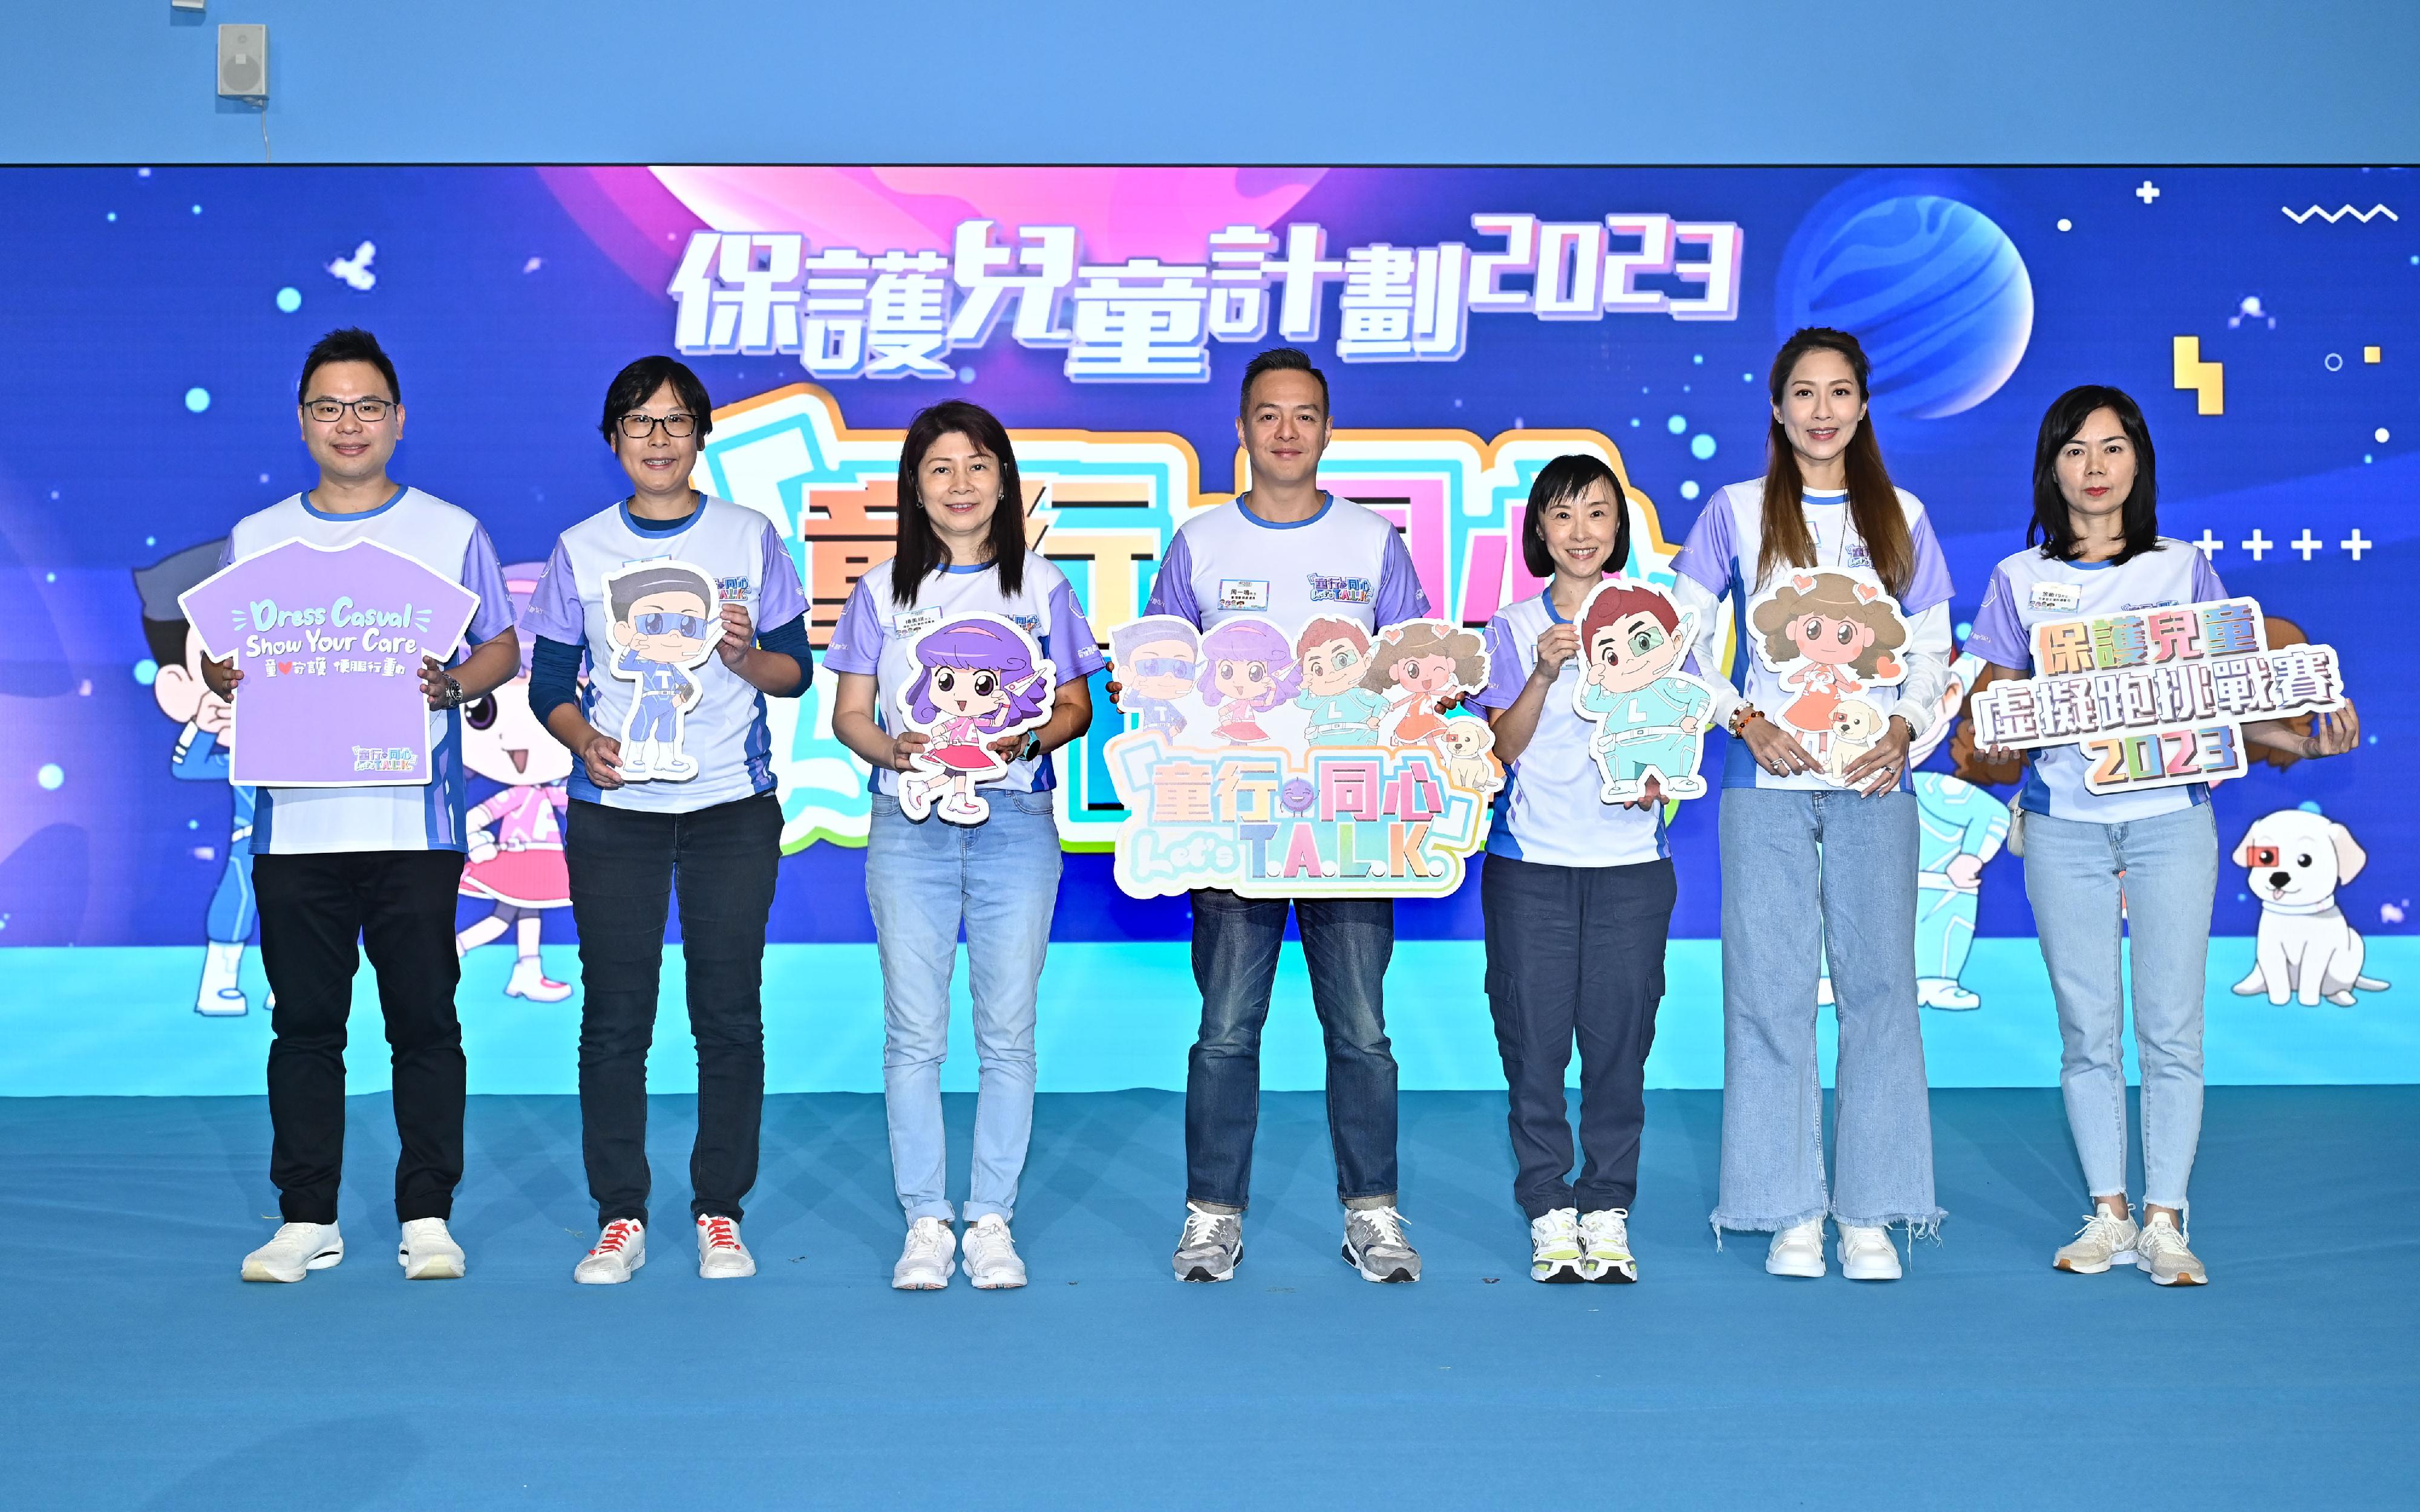 The Acting Commissioner of Police, Mr Chow Yat-ming (fourth left); the Director of Public Prosecutions of the Department of Justice, Ms Maggie Yang (third left); the Director of Social Welfare, Ms Charmaine Lee (third right); the Chairman of the Dress Casual Day Organising Committee of the Community Chest, Mr Wong Wai-yue (first left); artiste Ms Sharon Chan (second right); the Acting Director of Crime and Security, Ms Chung Wing-man (second left); and the Chief Superintendent (Crime Support), Ms Yu Hoi-kwan (first right), officiate at the opening ceremony of "Let's T.A.L.K. - Child Protection Campaign 2023" today (September 23).